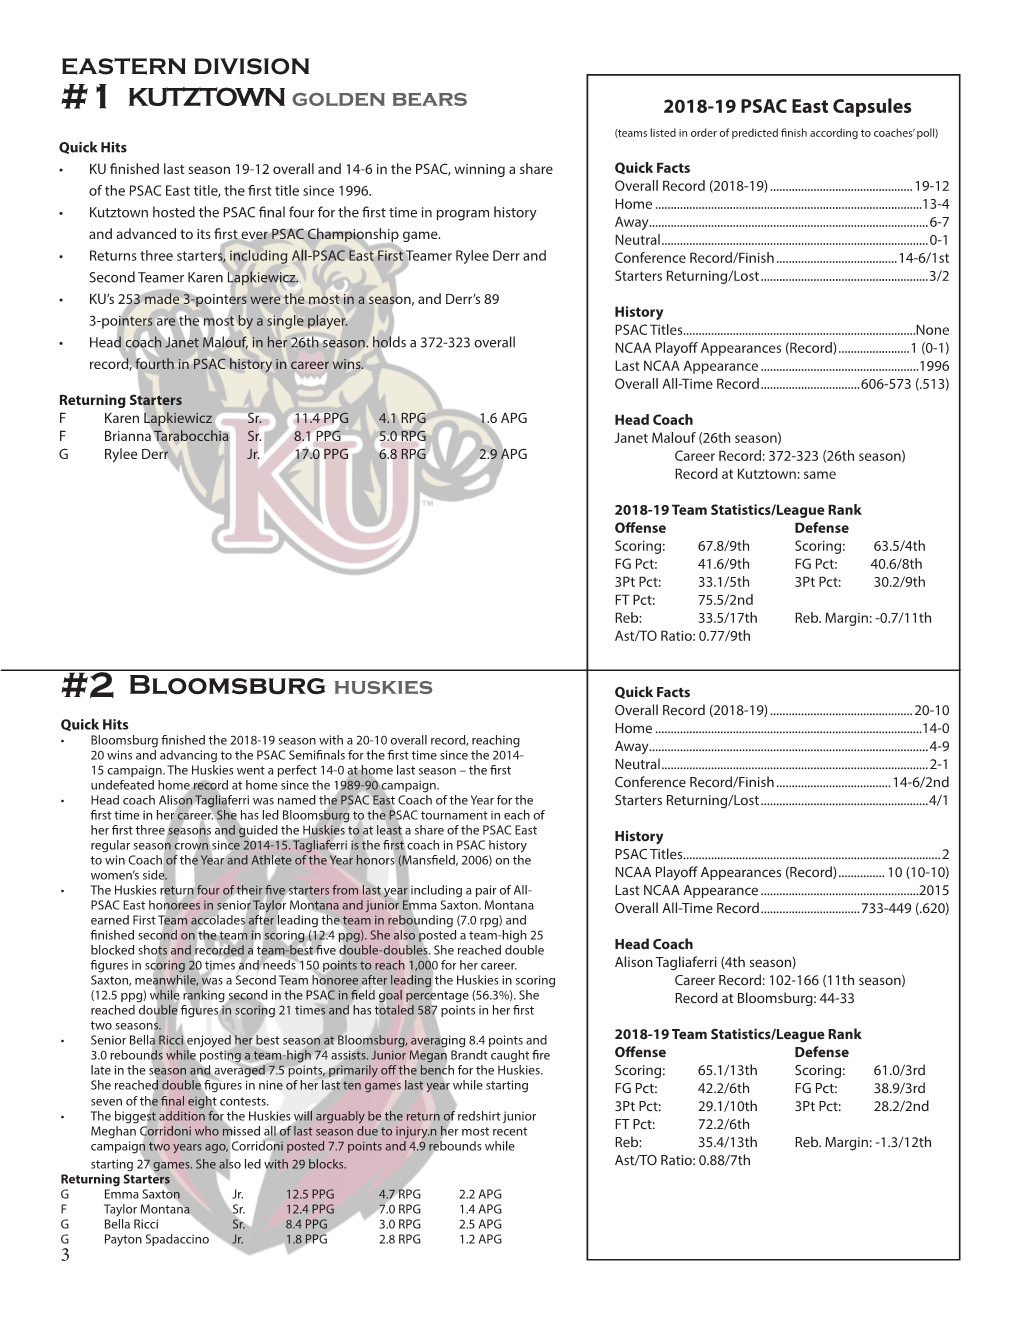 Bloomsburg Huskies Quick Facts Overall Record (2018-19)